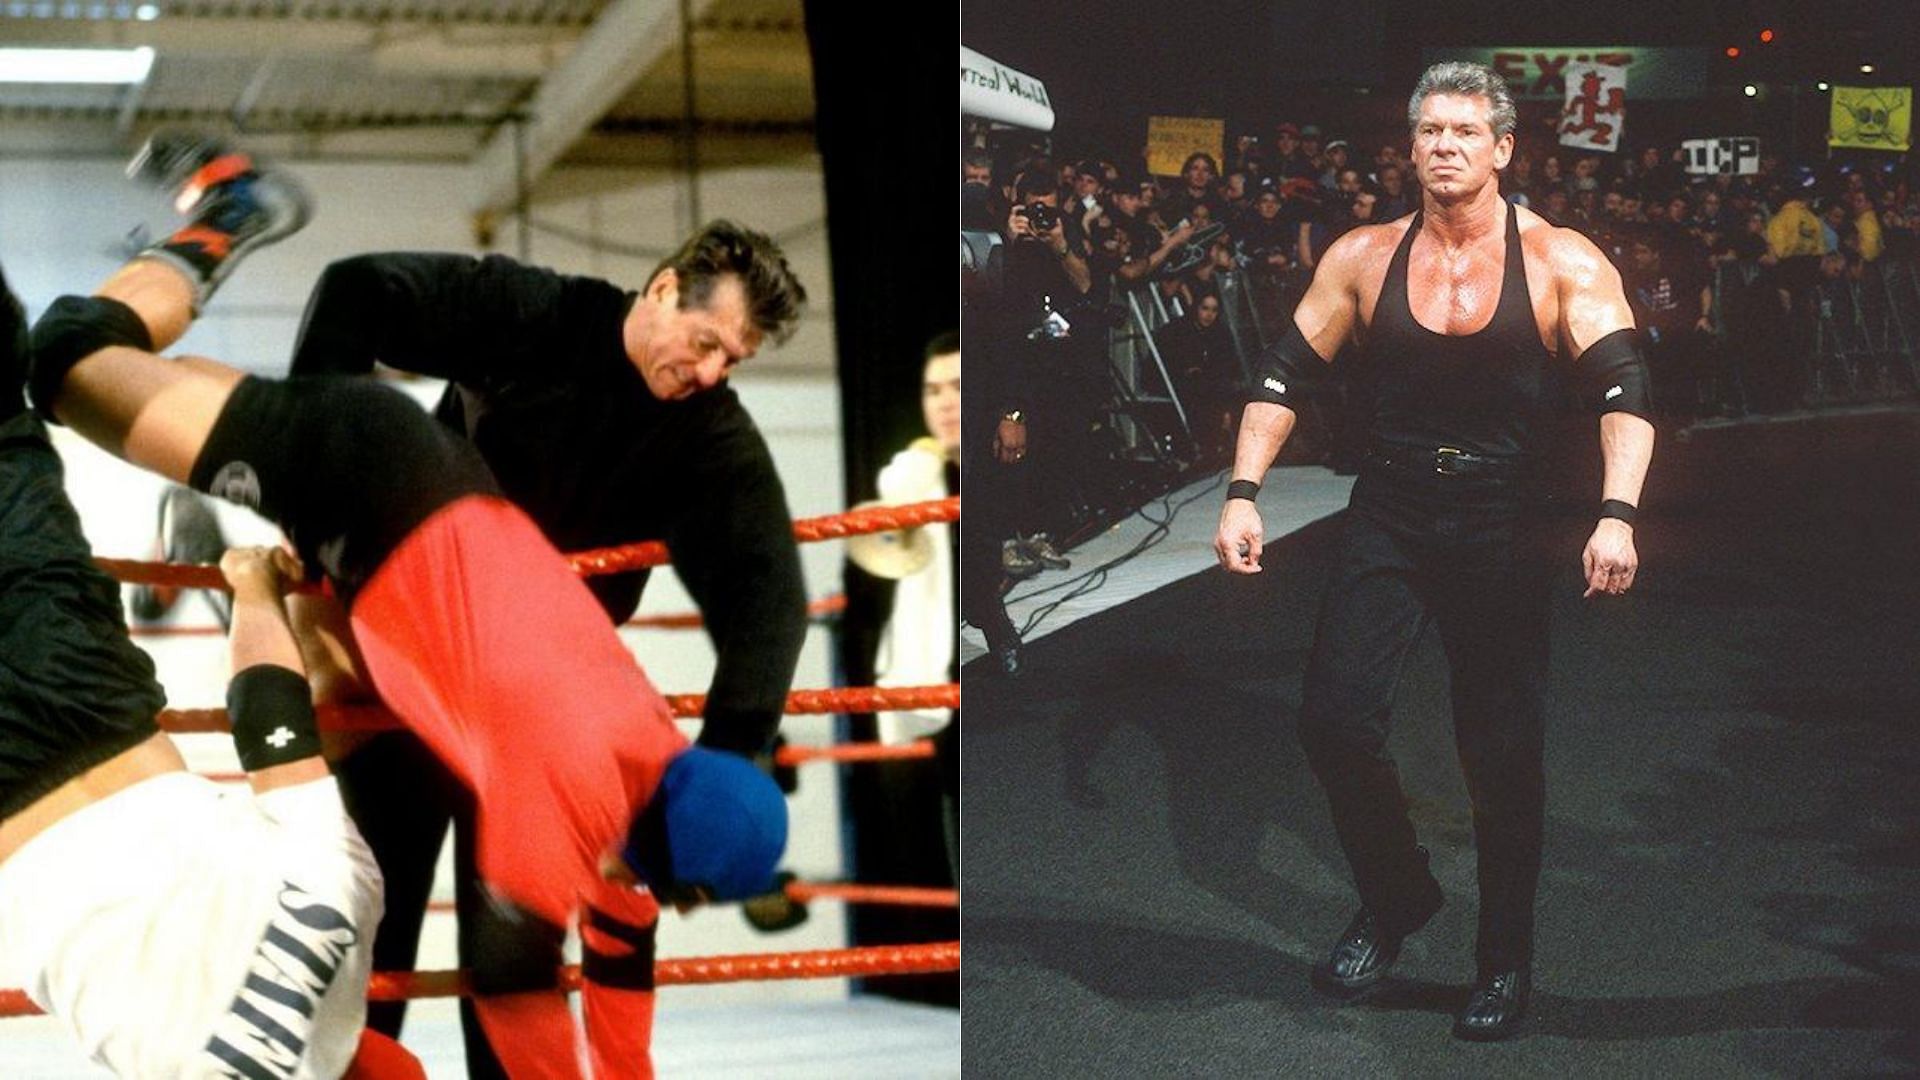 Vince McMahon made his wrestling debut at the age of 52.